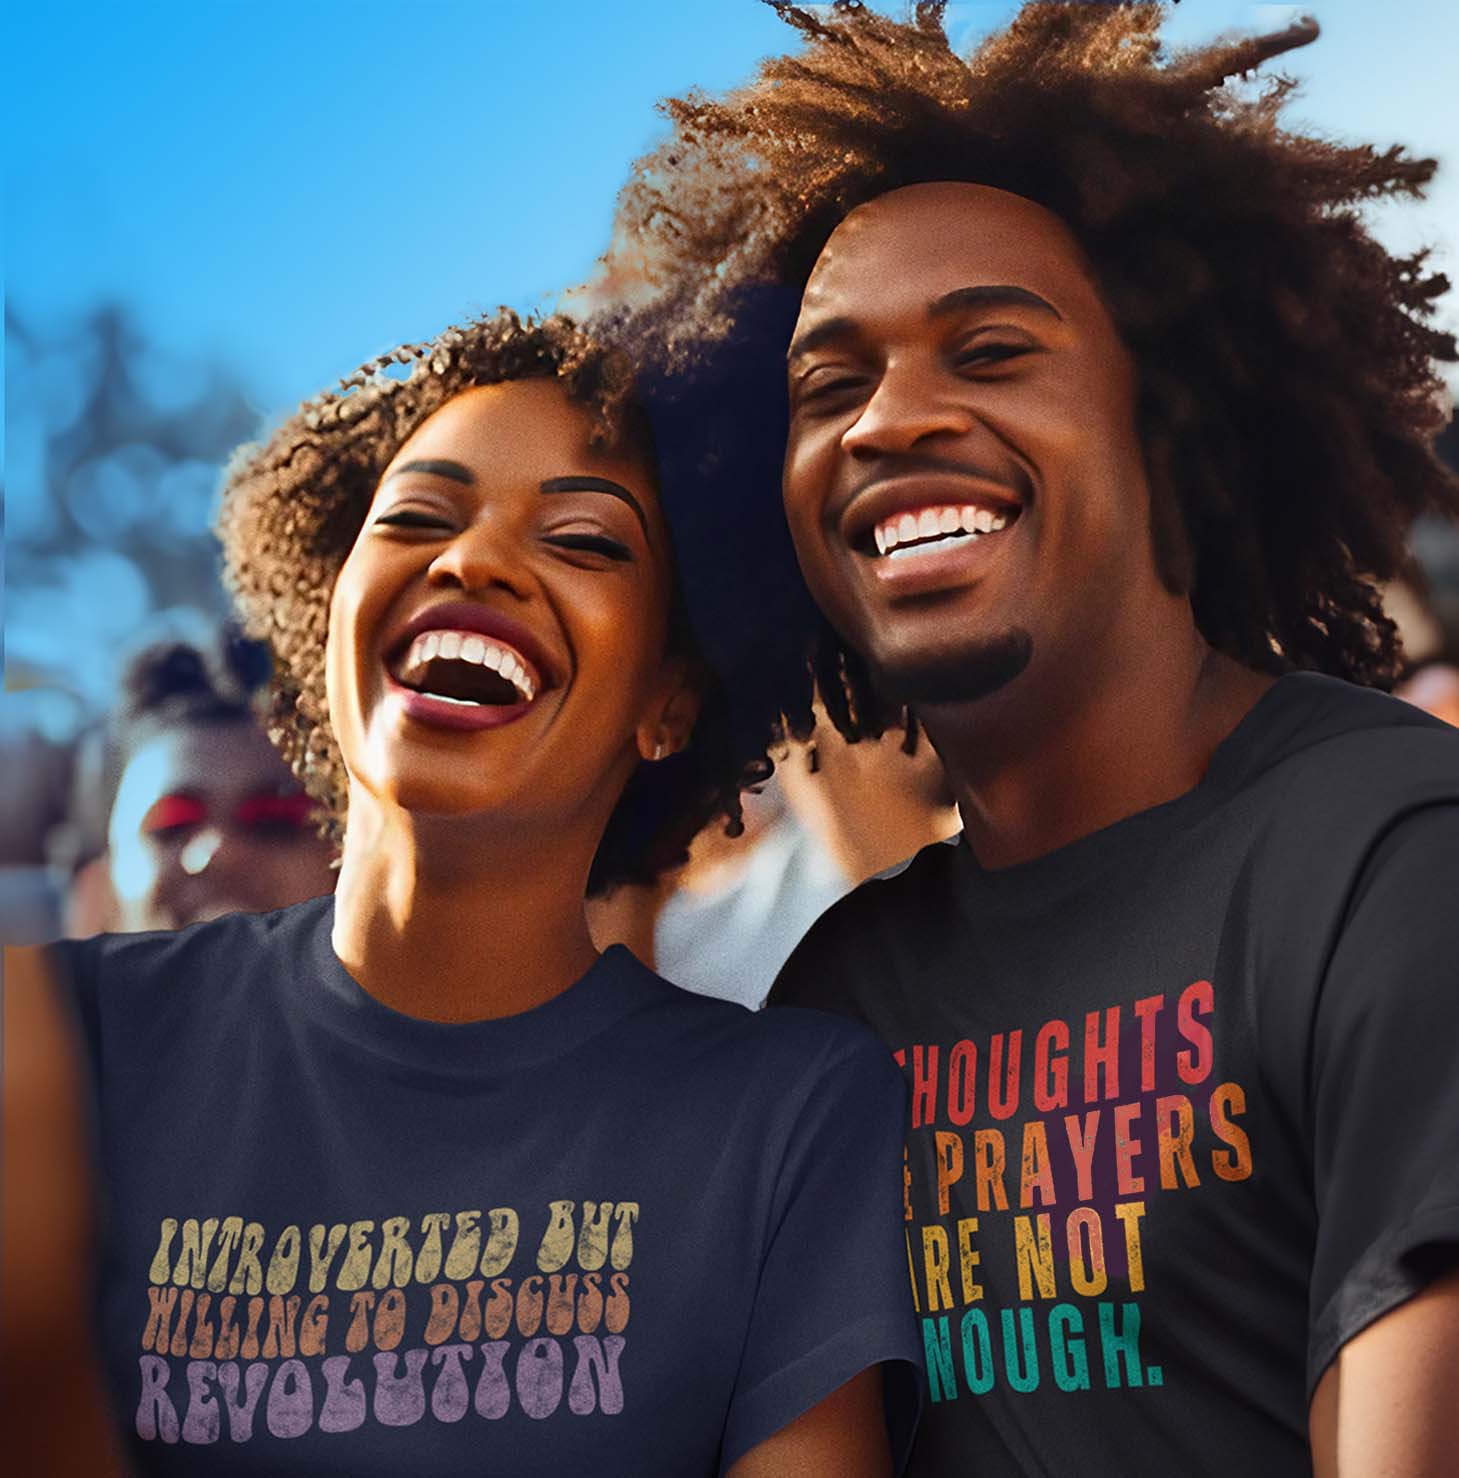 A Black man in a woman wearing unisex T-shirts. The woman's shirt says, "INTROVERTED BUT WILLING TO DISCUSS REVOLUTION.” the man's shirt says, “THOUGHTS AND PRAYERS ARE NOT ENOUGH.”